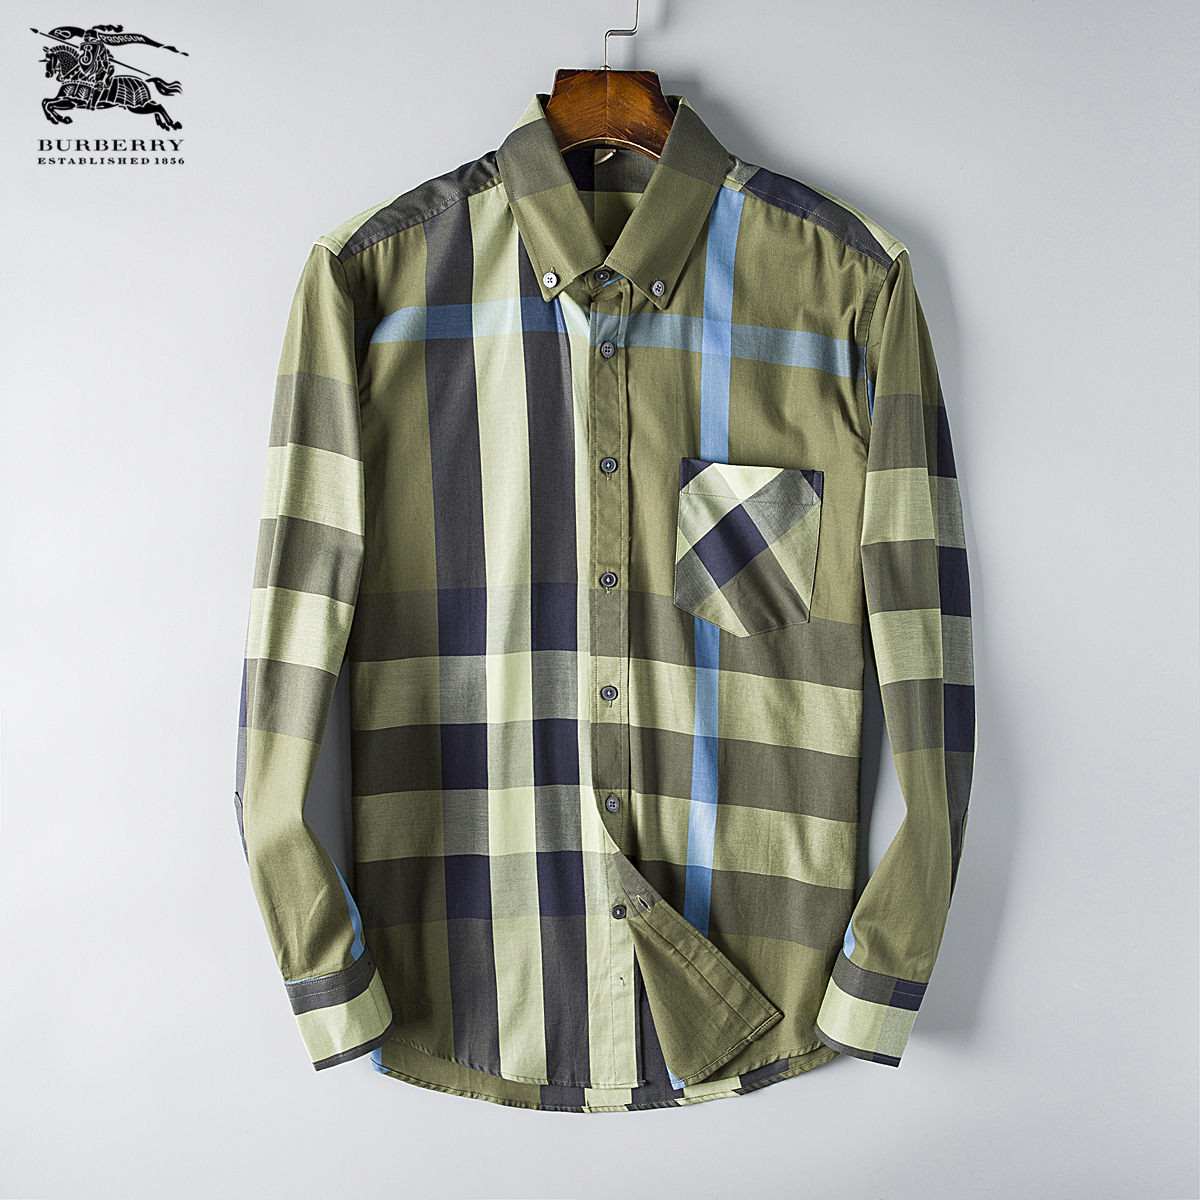 Cheap 2018 New Cheap Burberry Long Sleeved Shirts For Men in 195186,$28 ...